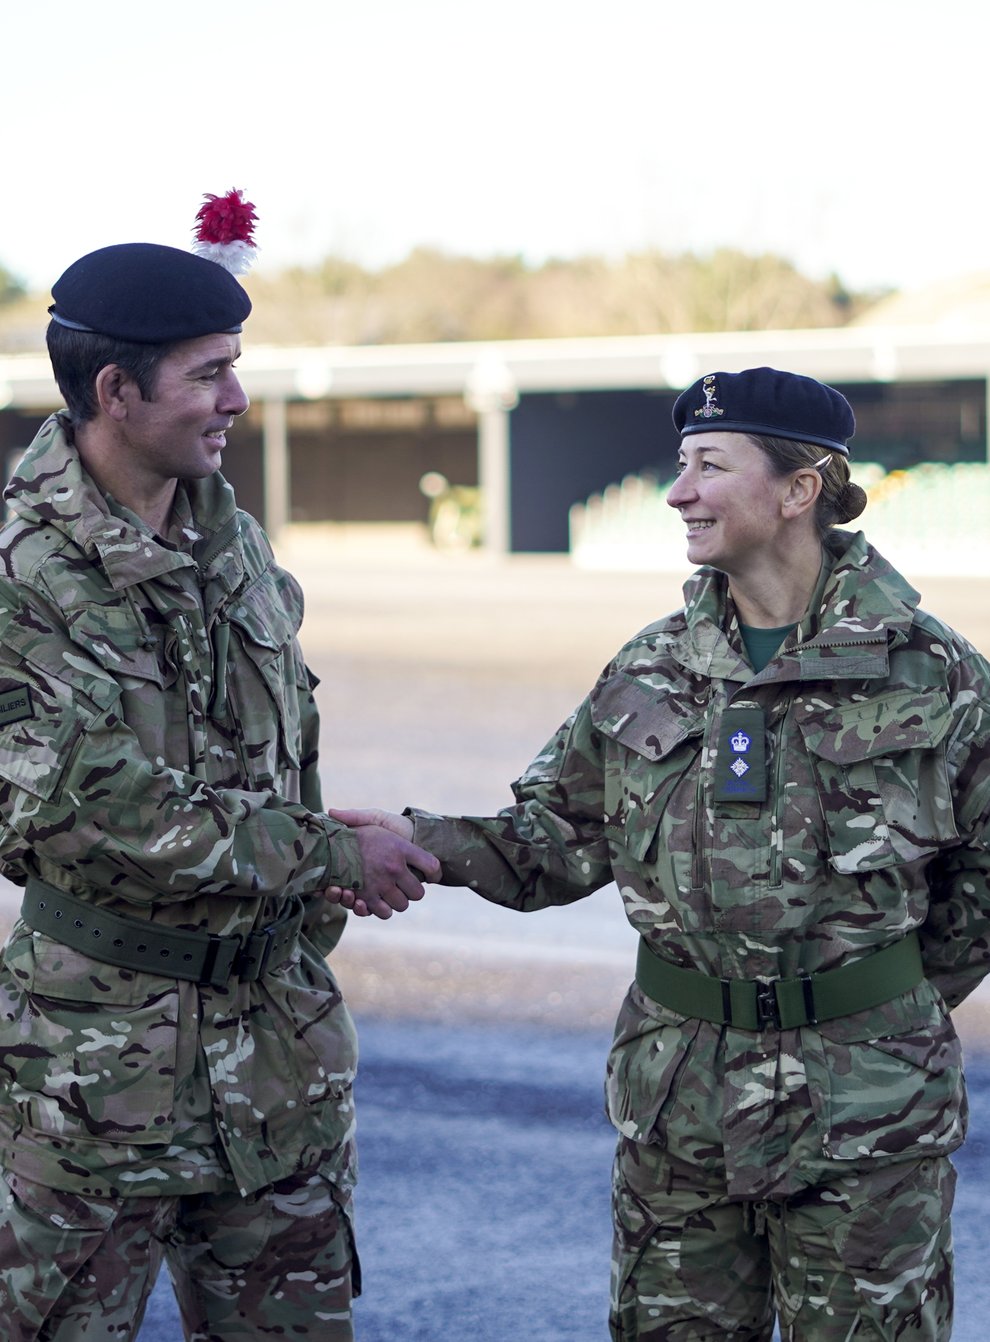 Lt Col Shamus Kelly shakes the hand of his wife, Lt Col Lyndsey Kelly, as he exchanges the command of 1ATR (Army Training Regiment) to her (Steve Parsons/PA)